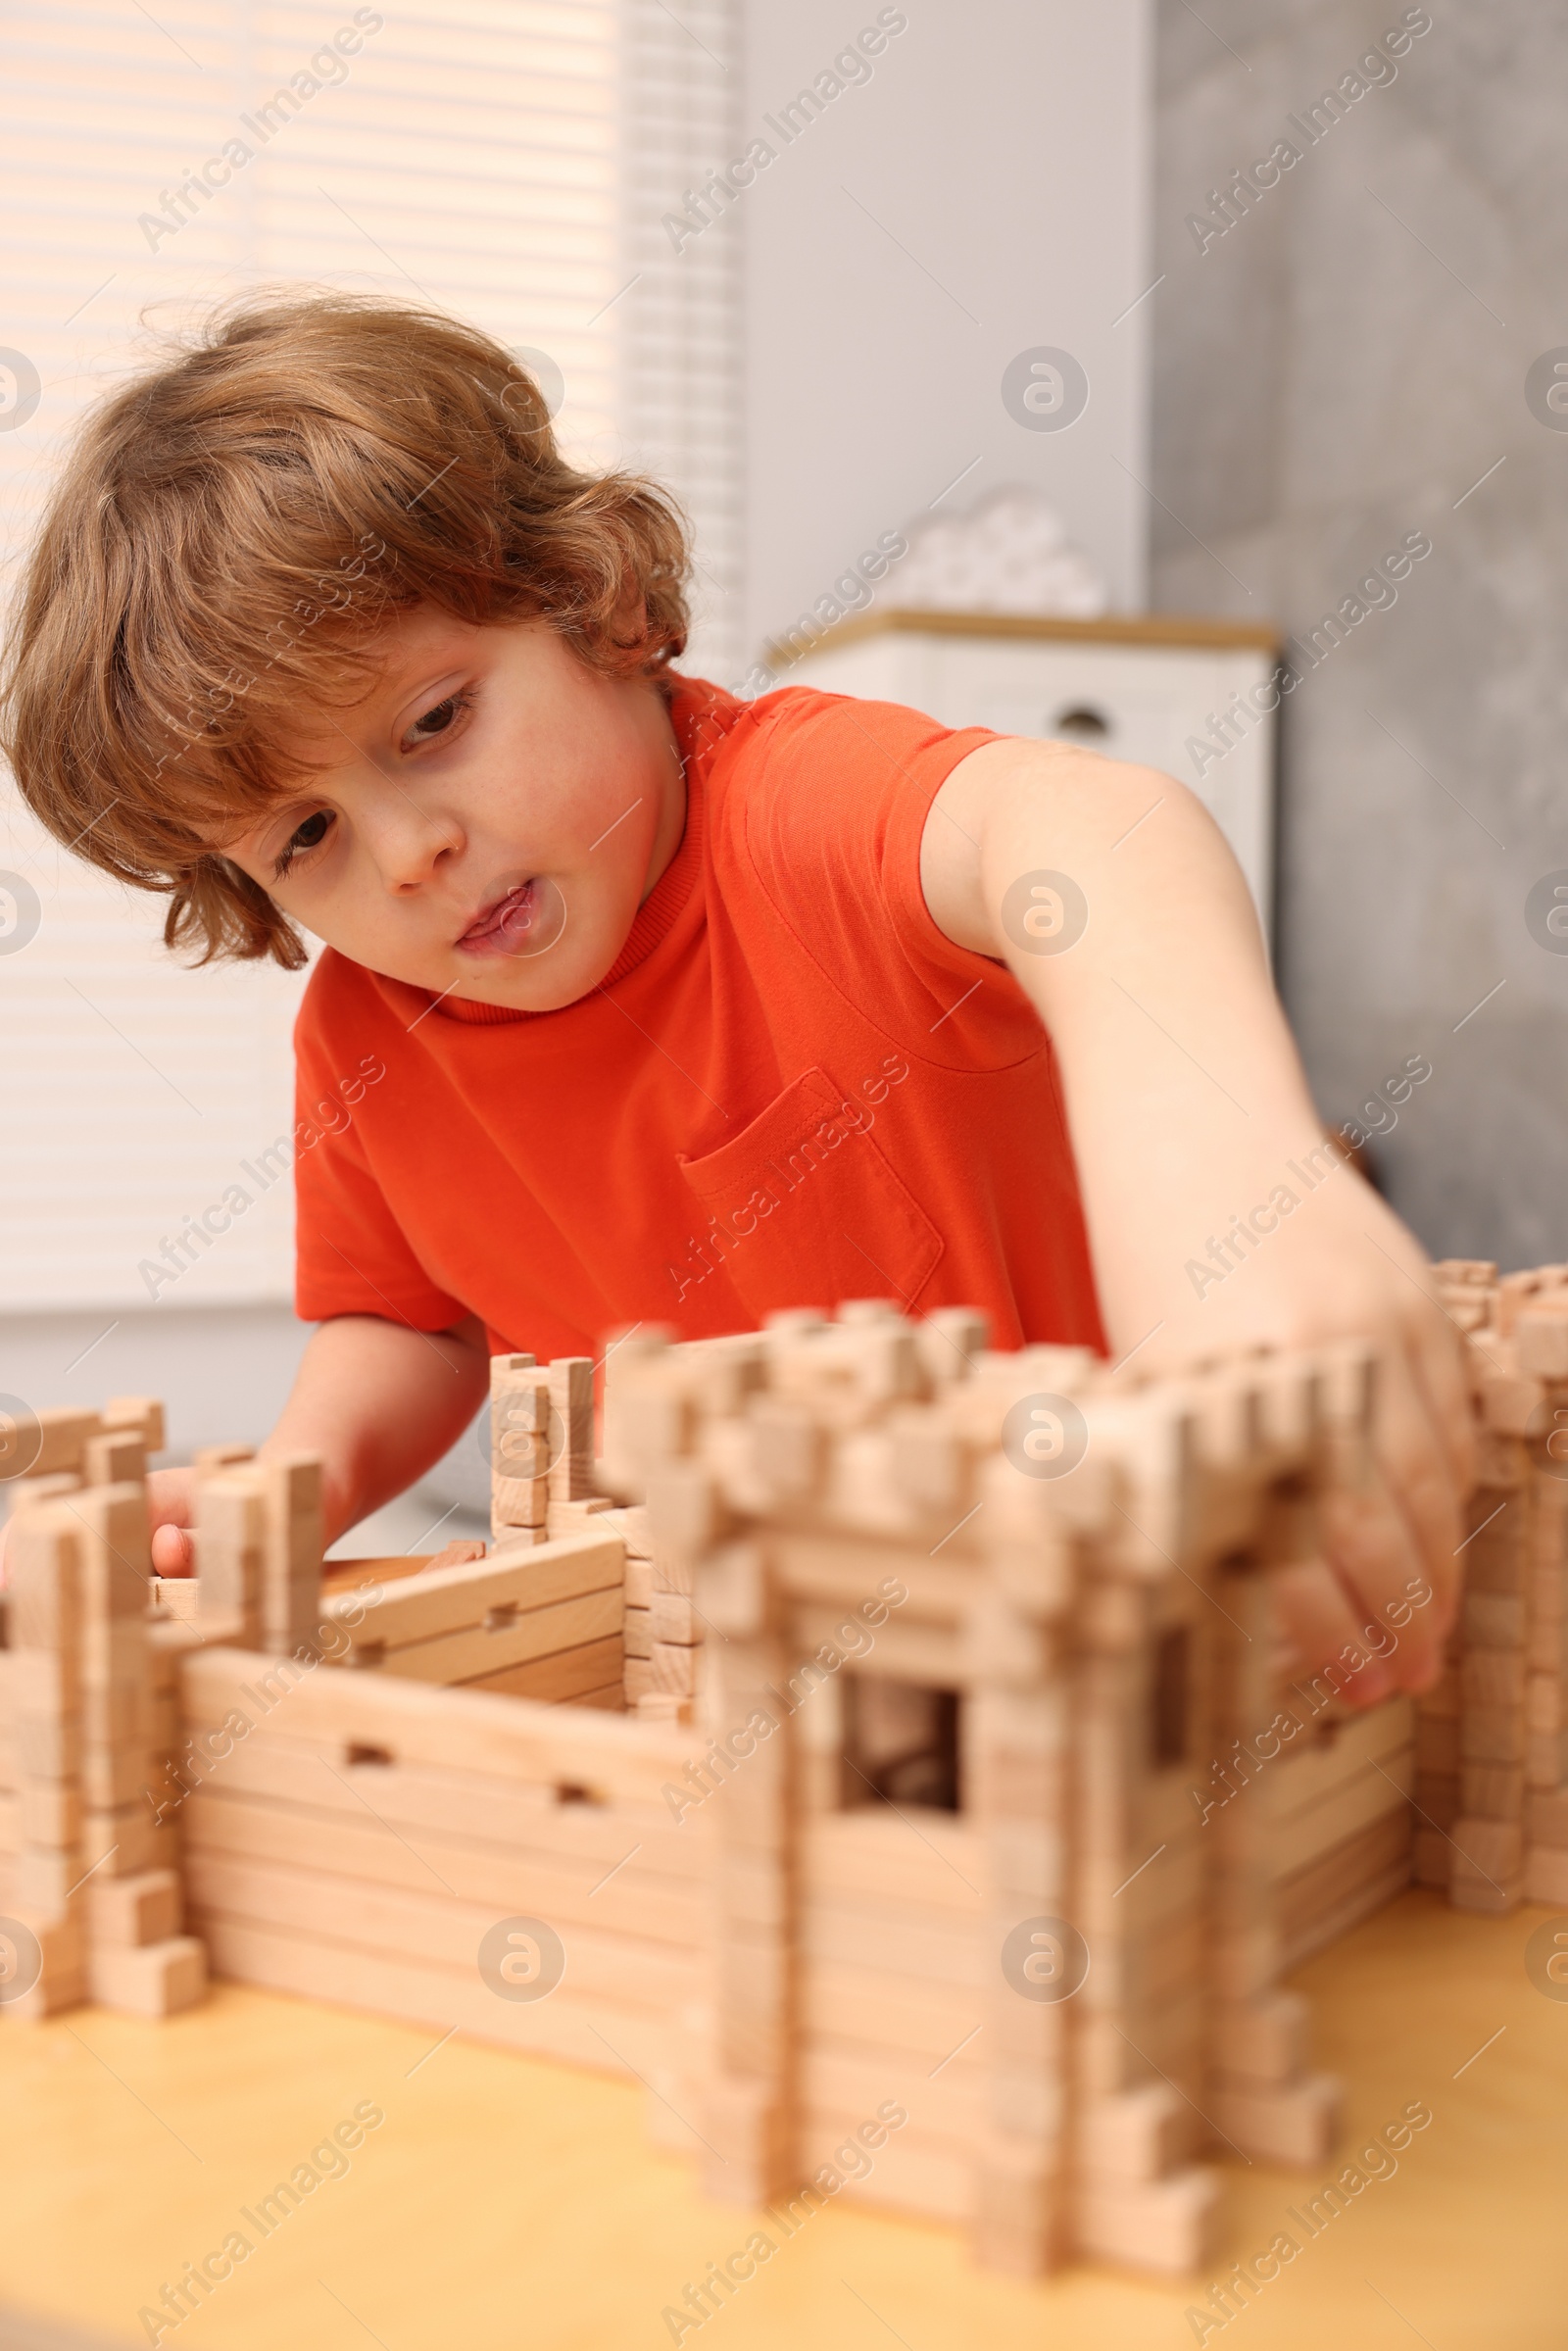 Photo of Cute little boy playing with wooden construction set at table in room. Child's toy